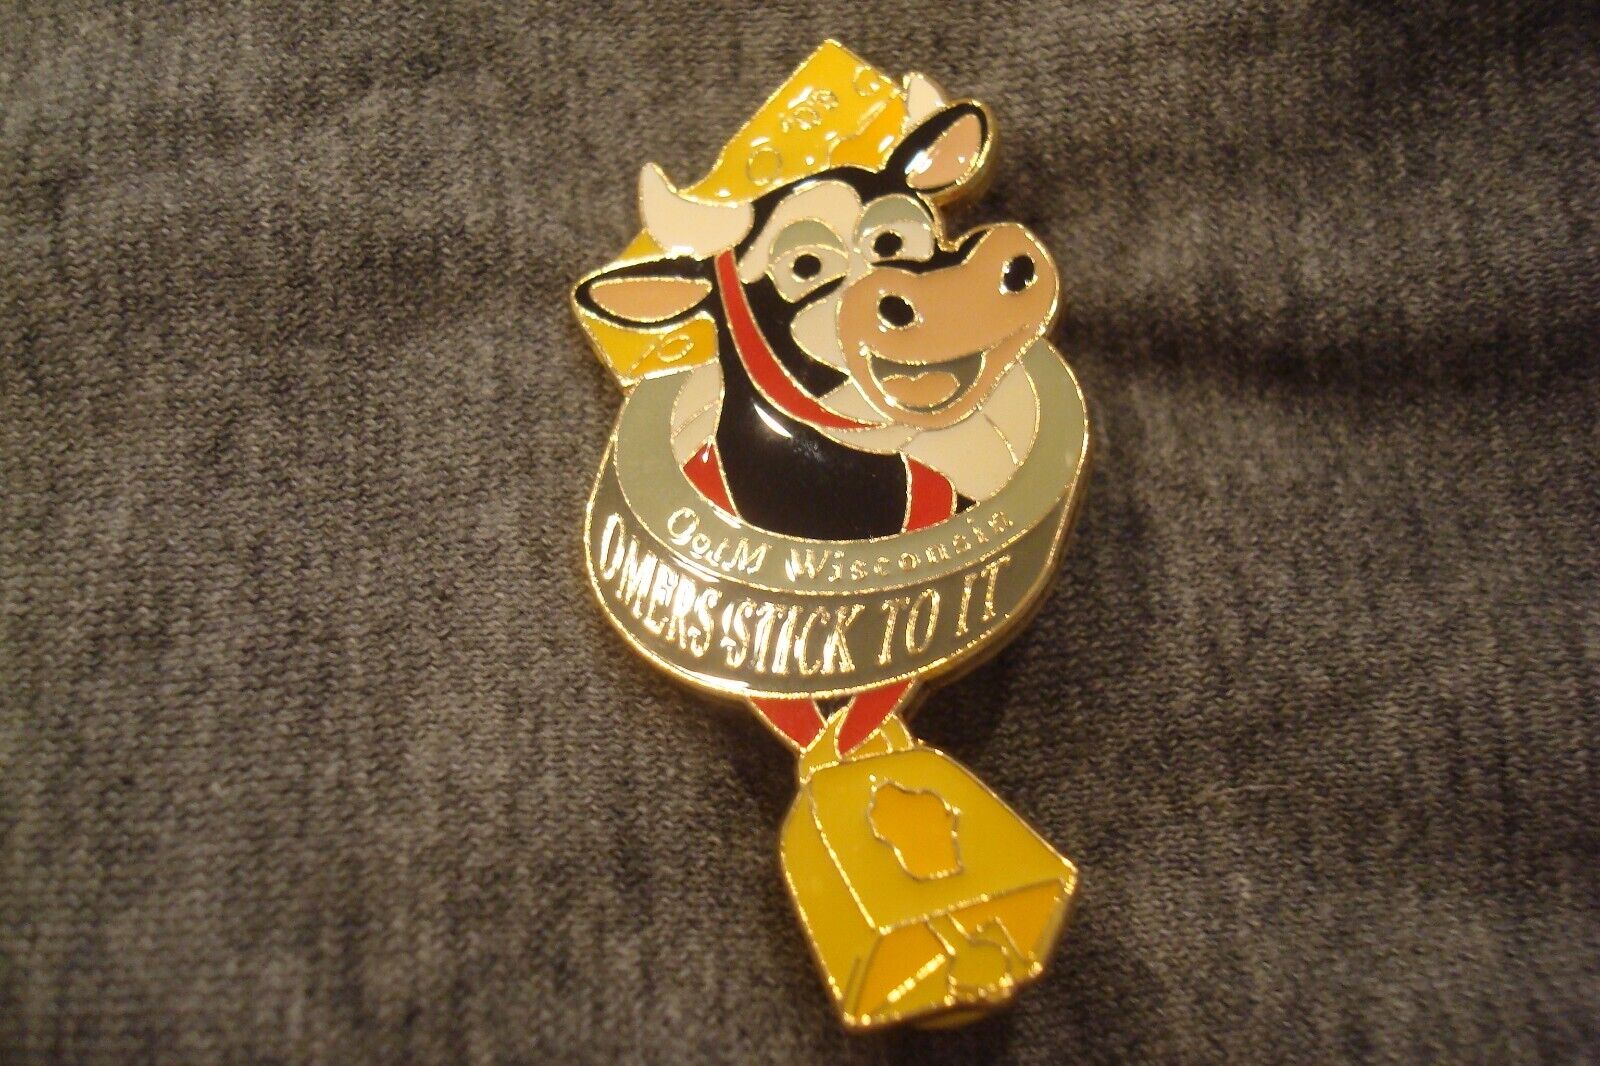 2009 Wisconsin Cow w/ Bell and Slogan Omers Stick To It Odyssey of the Mind Pin